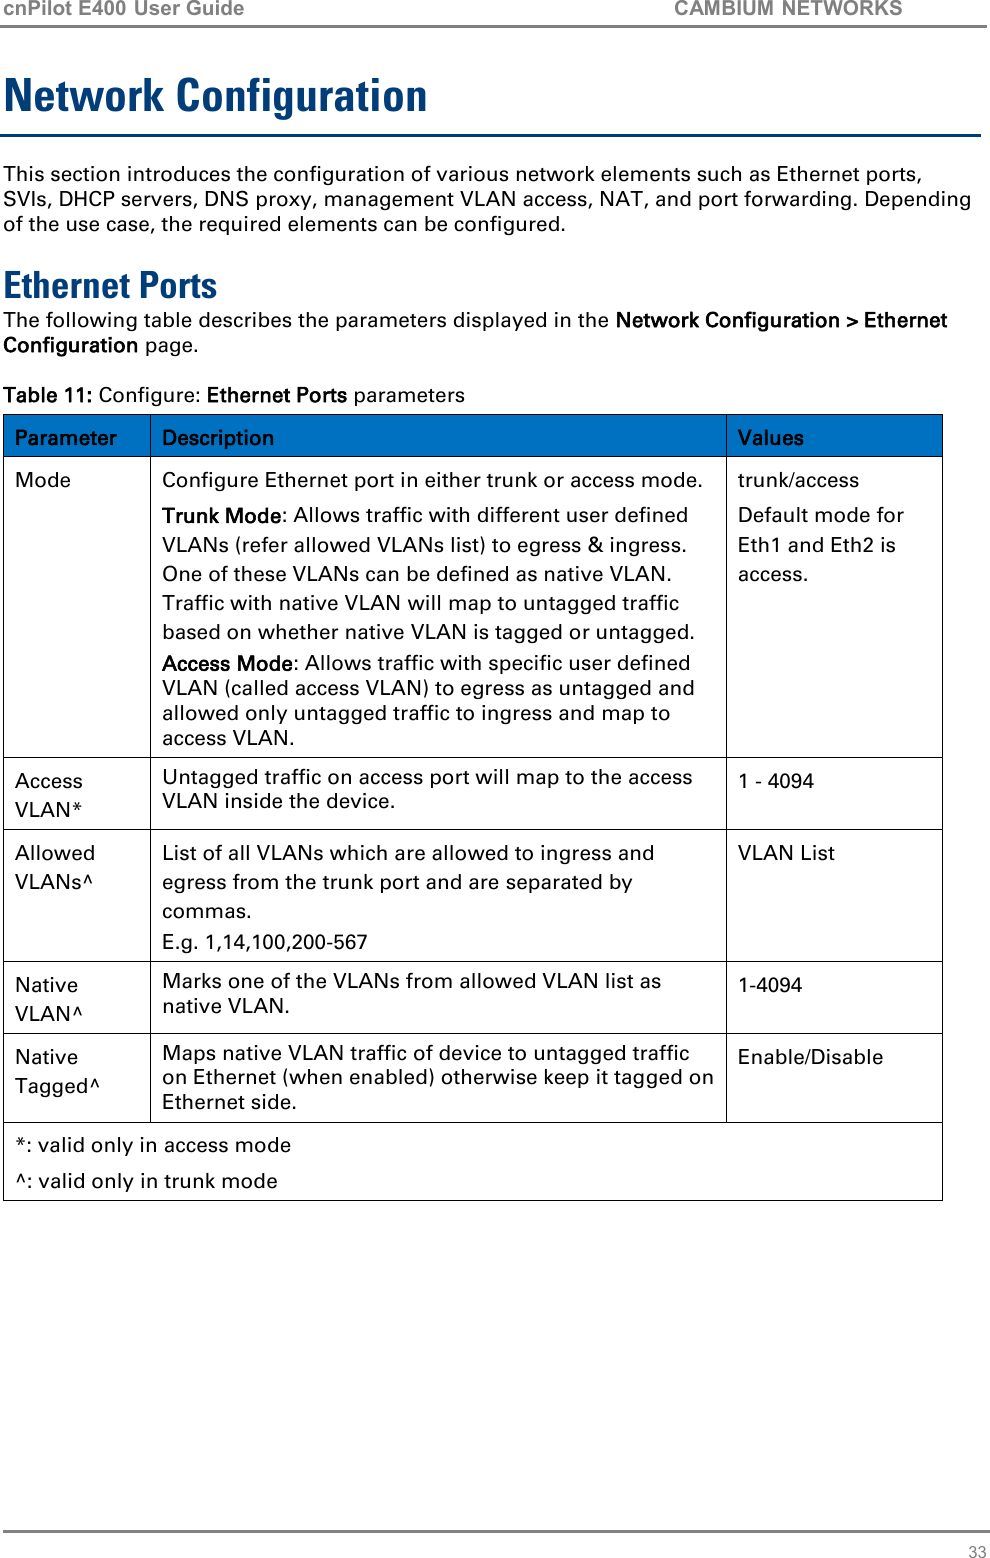 cnPilot E400 User Guide           CAMBIUM NETWORKS   33 Network Configuration This section introduces the configuration of various network elements such as Ethernet ports, SVIs, DHCP servers, DNS proxy, management VLAN access, NAT, and port forwarding. Depending of the use case, the required elements can be configured.   Ethernet Ports The following table describes the parameters displayed in the Network Configuration &gt; Ethernet Configuration page.  Table 11: Configure: Ethernet Ports parameters Parameter Description Values Mode Configure Ethernet port in either trunk or access mode.  Trunk Mode: Allows traffic with different user defined VLANs (refer allowed VLANs list) to egress &amp; ingress. One of these VLANs can be defined as native VLAN. Traffic with native VLAN will map to untagged traffic based on whether native VLAN is tagged or untagged. Access Mode: Allows traffic with specific user defined VLAN (called access VLAN) to egress as untagged and allowed only untagged traffic to ingress and map to access VLAN. trunk/access Default mode for Eth1 and Eth2 is access. Access VLAN* Untagged traffic on access port will map to the access VLAN inside the device. 1 - 4094 Allowed VLANs^ List of all VLANs which are allowed to ingress and egress from the trunk port and are separated by commas.  E.g. 1,14,100,200-567 VLAN List Native VLAN^ Marks one of the VLANs from allowed VLAN list as native VLAN. 1-4094 Native Tagged^ Maps native VLAN traffic of device to untagged traffic on Ethernet (when enabled) otherwise keep it tagged on Ethernet side. Enable/Disable *: valid only in access mode ^: valid only in trunk mode        